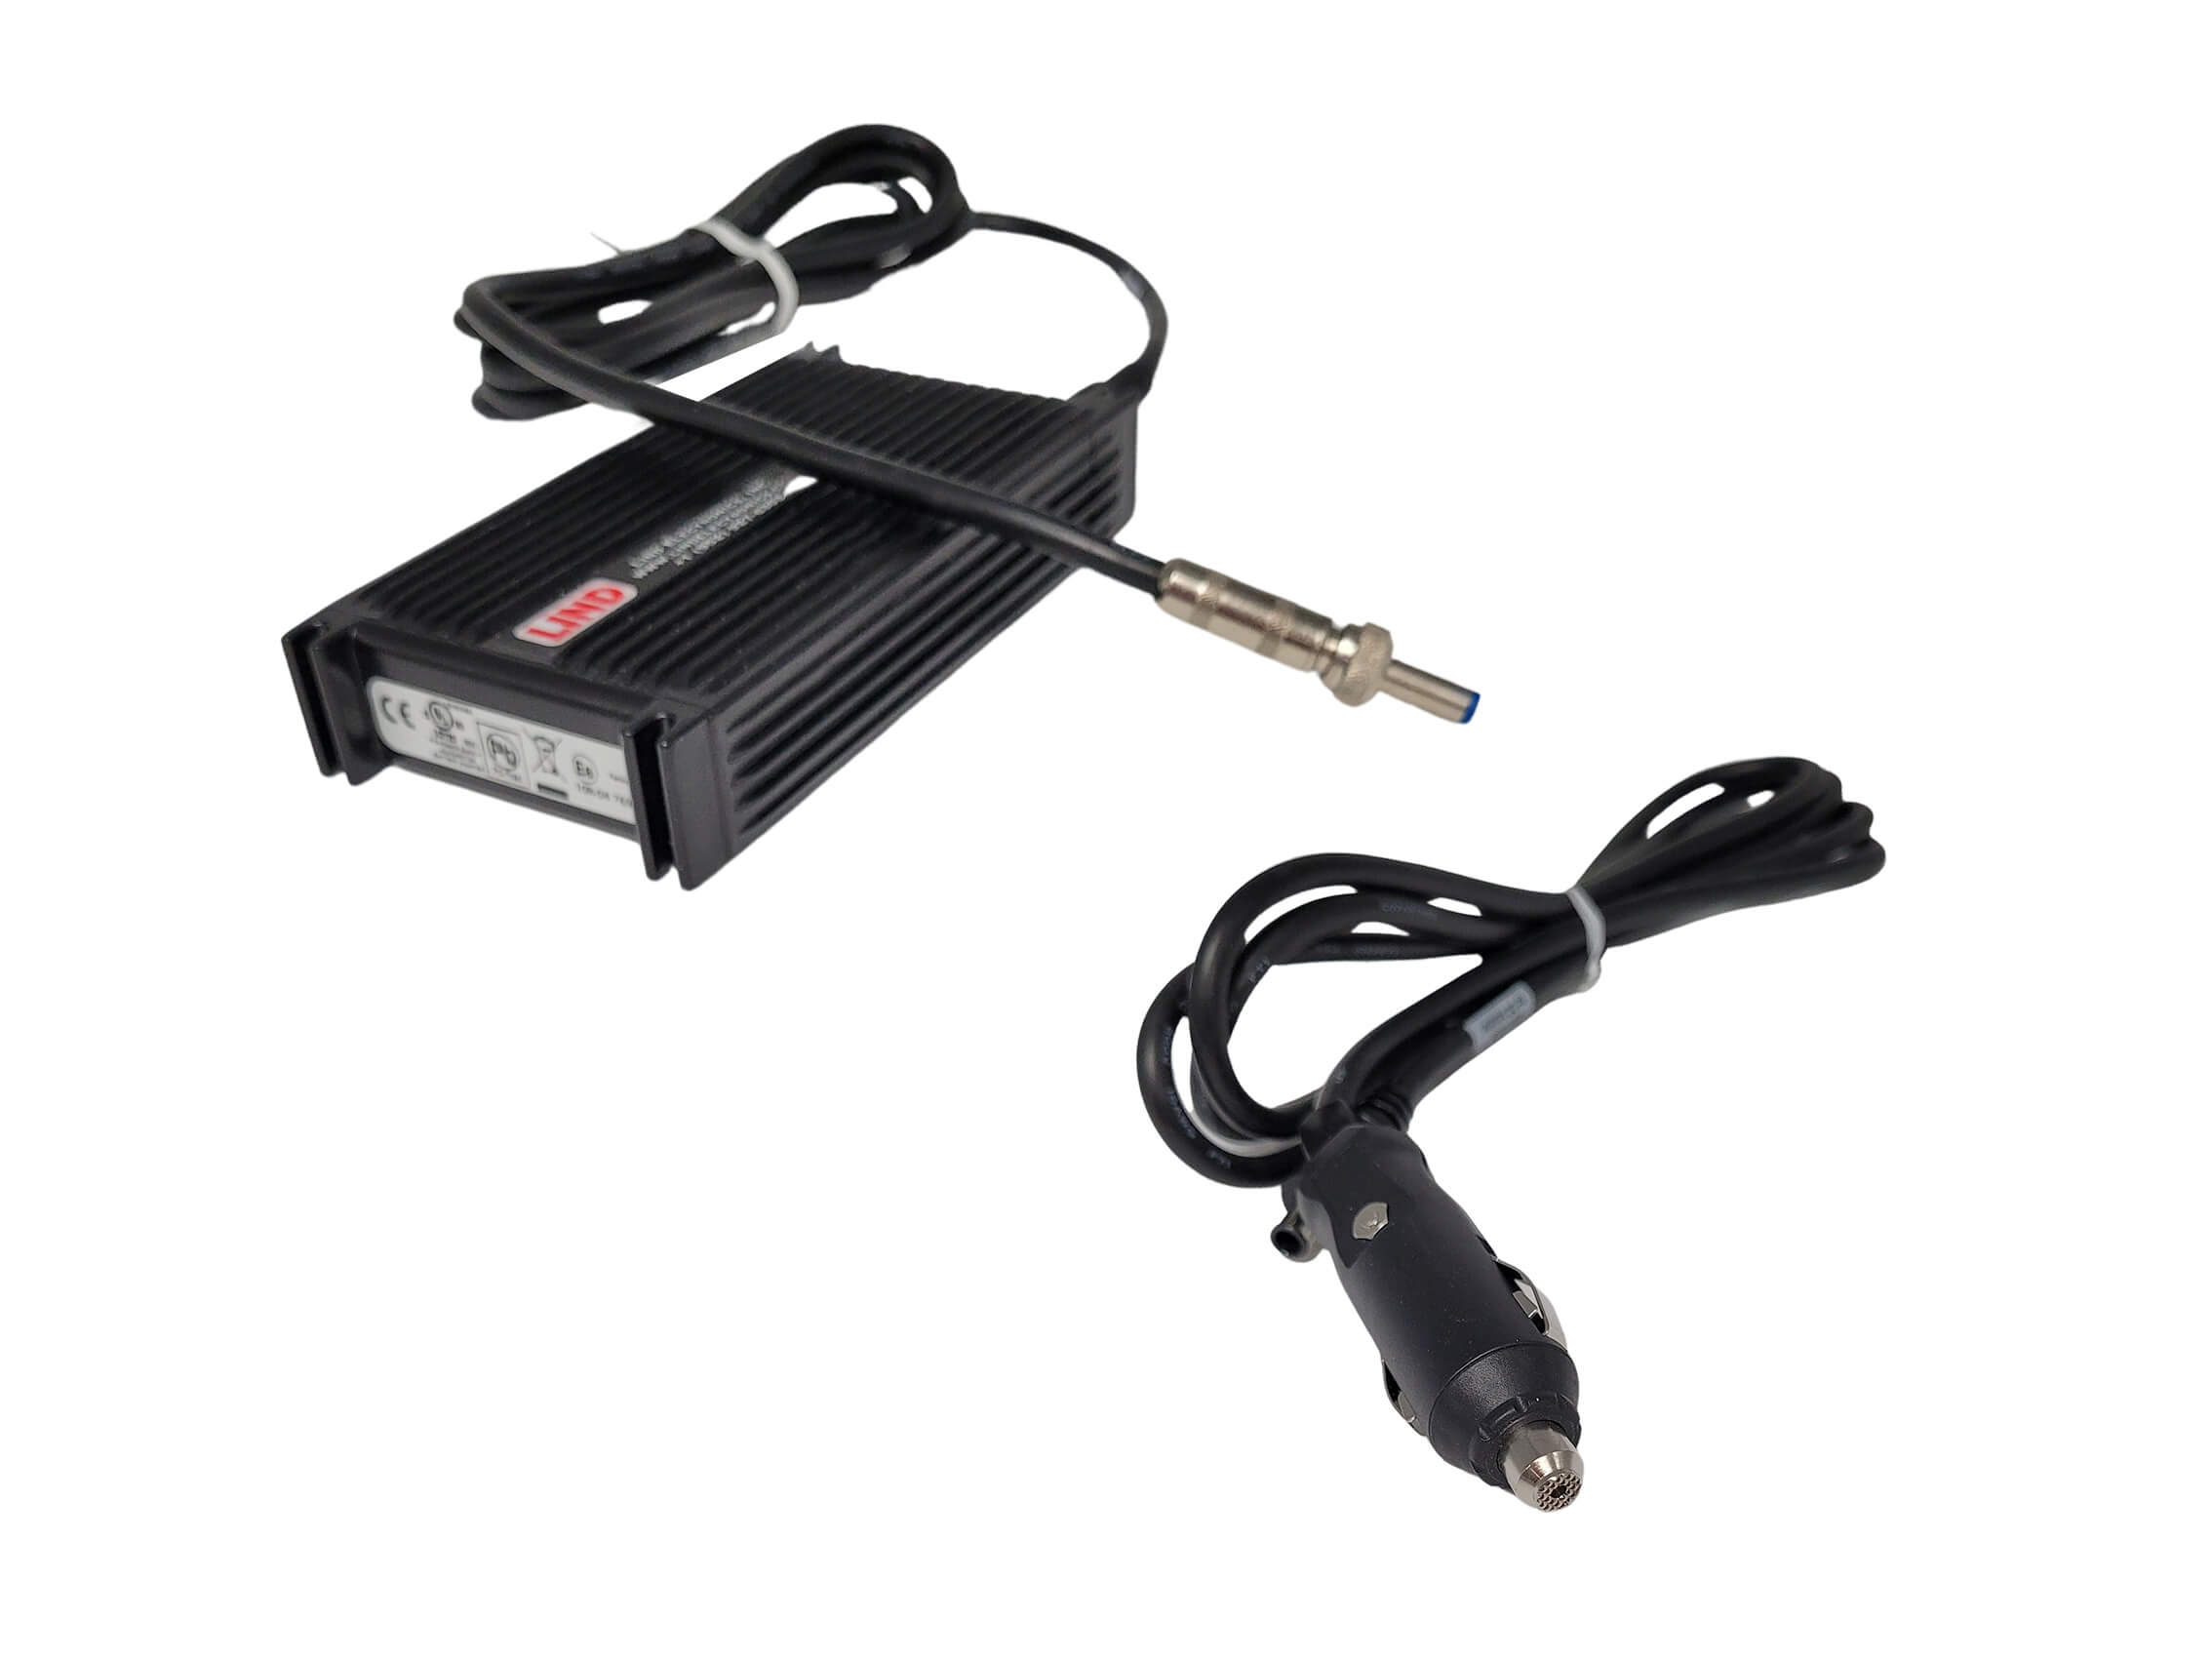 Power Supply with Switchcraft Connector for DS-DELL-904 & 904-4, & DS-DELL-907 & 907-4 Docking Stations